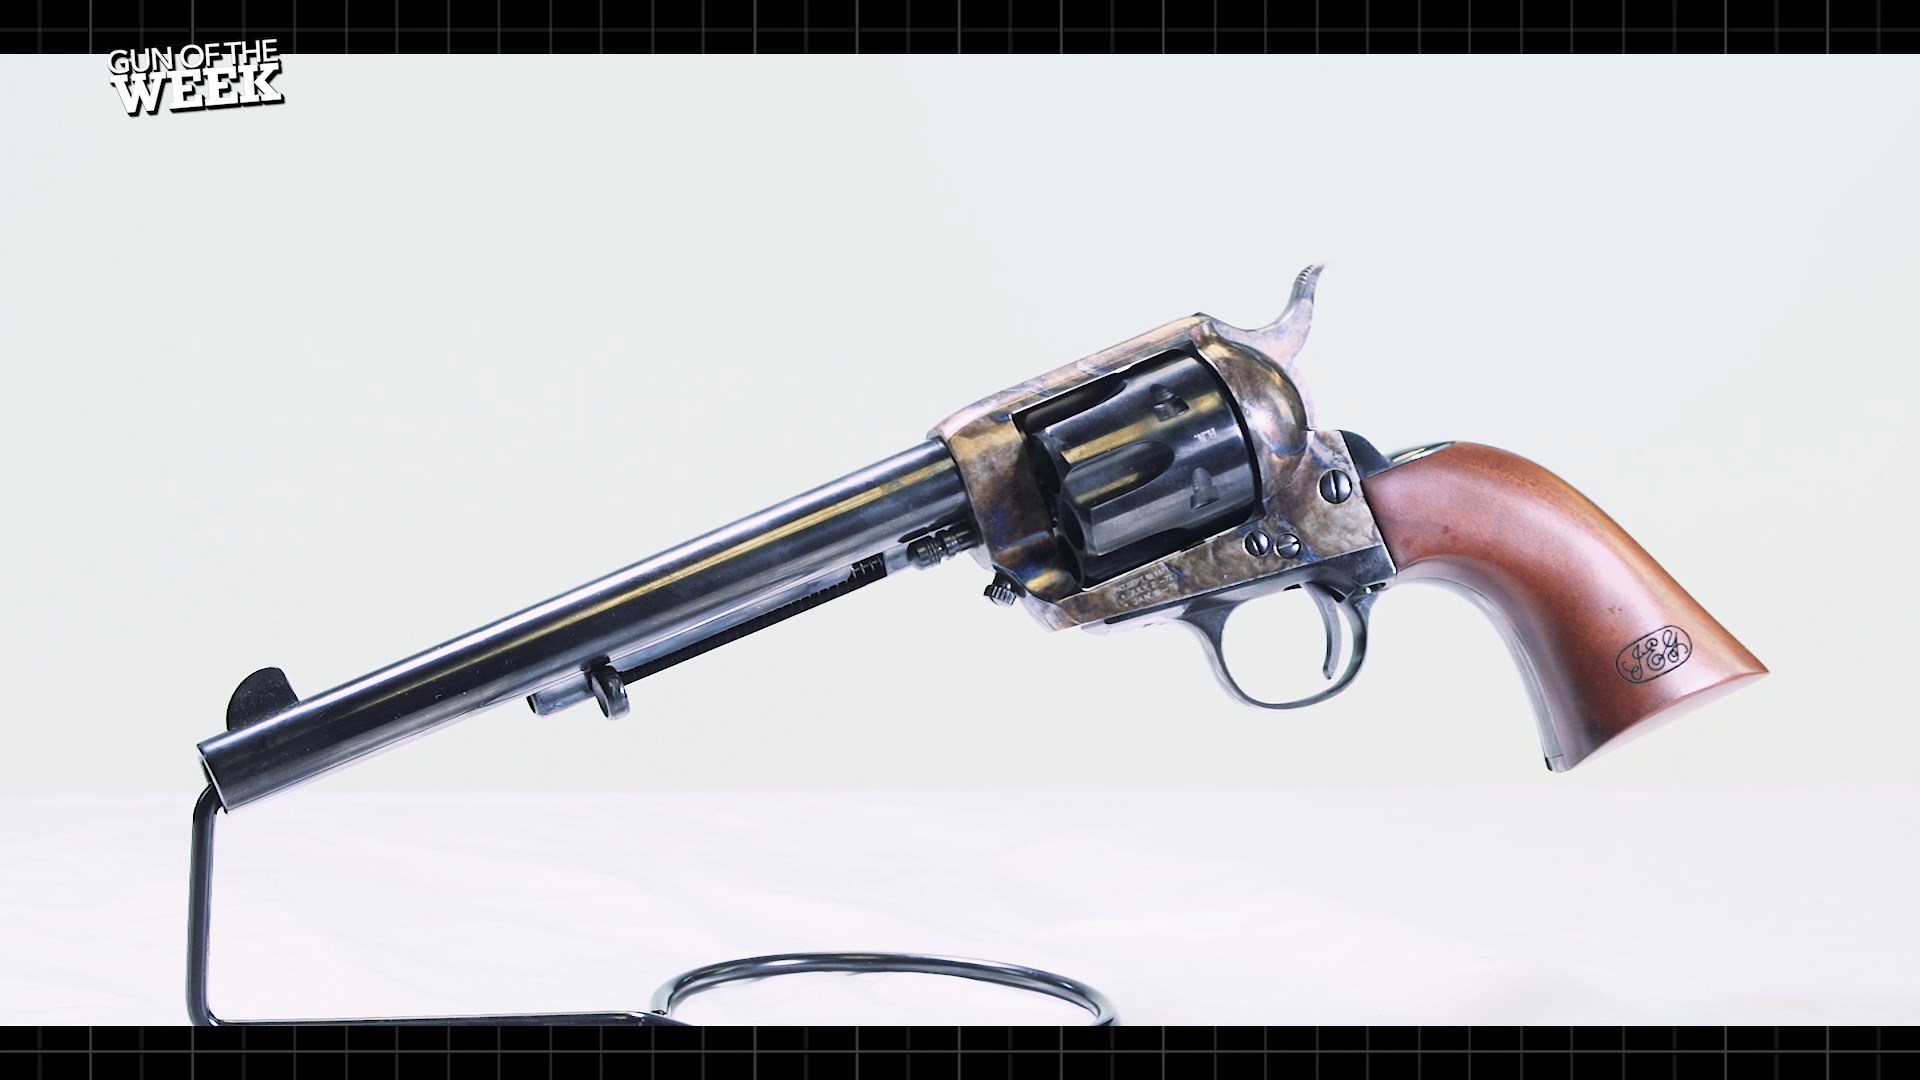 Cimarron Firearms Model P Henry Nettleton Single Action Army revolver left-side view on stand white background GUN OF THE WEEK text corner